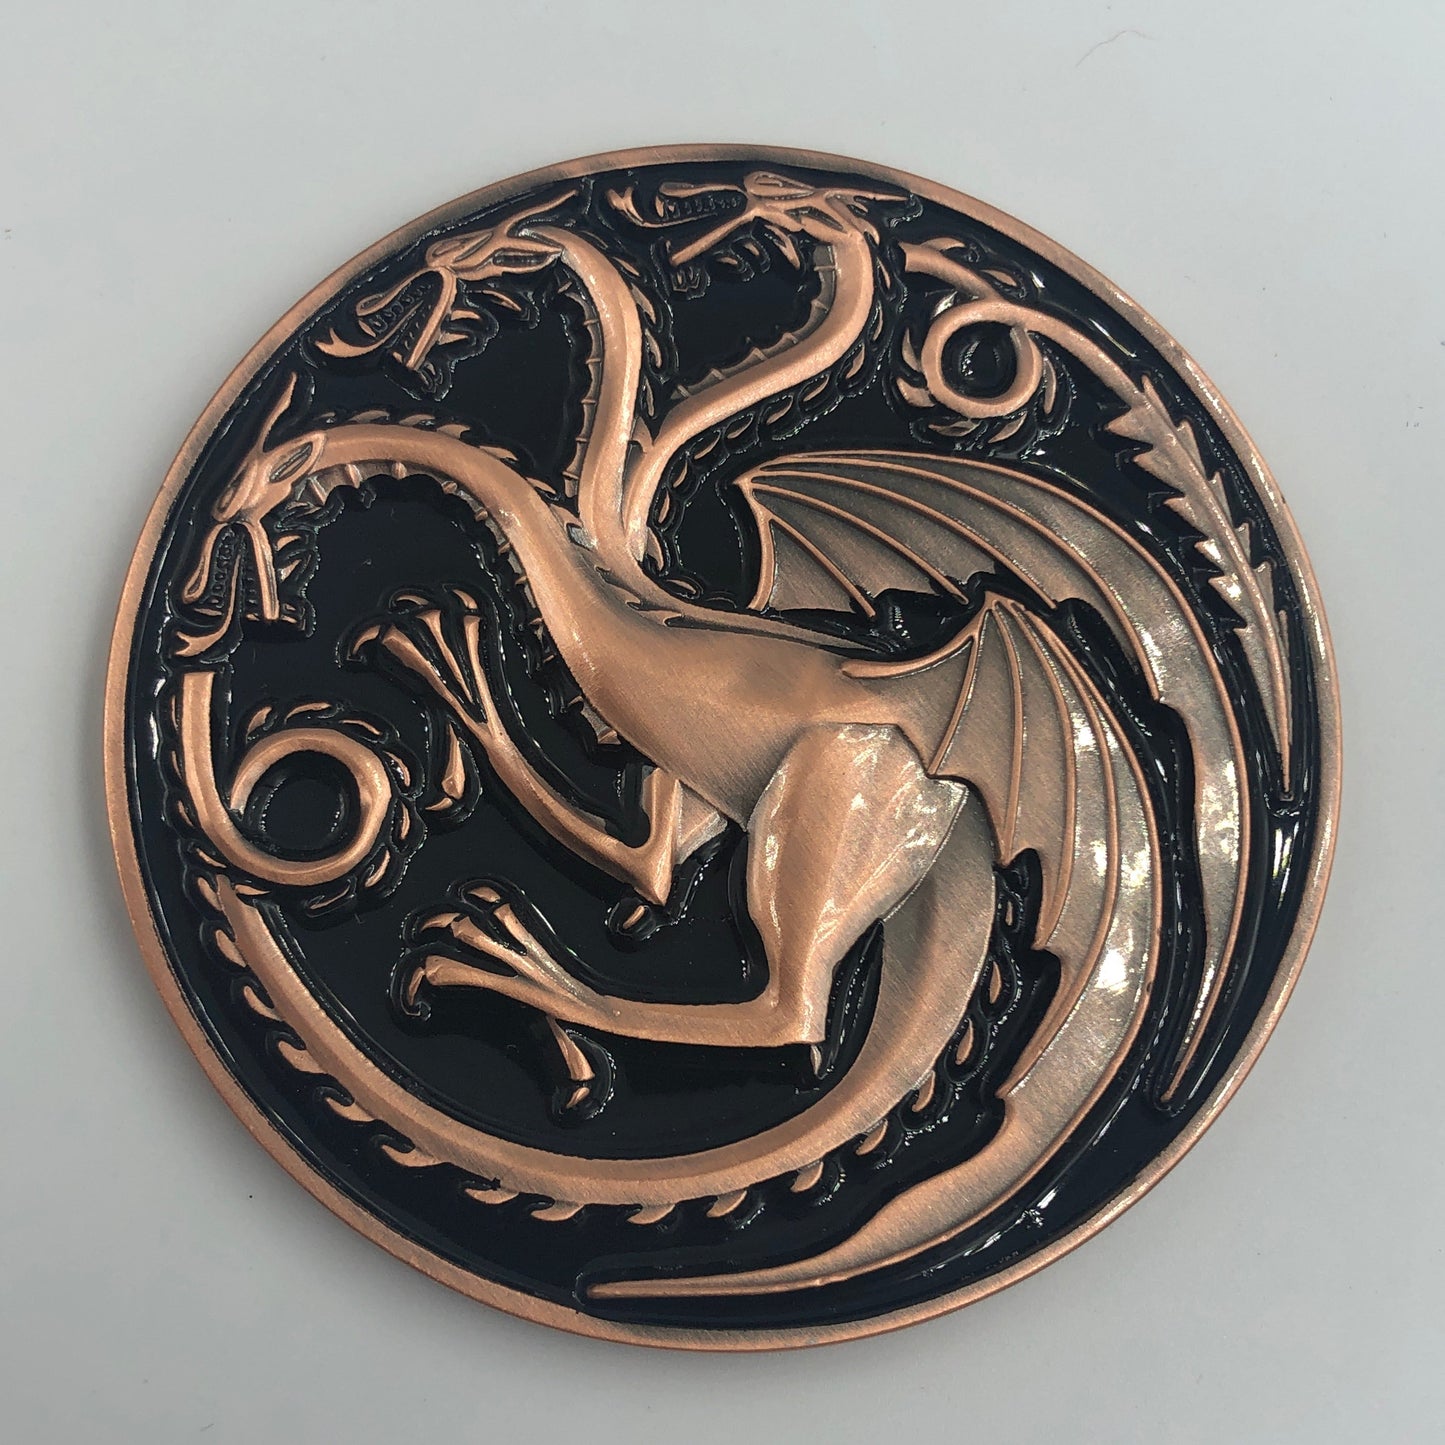 H-010 Mother of Dragons GoT challenge coin Game of Thrones Daenerys Targaryen Fire and Blood